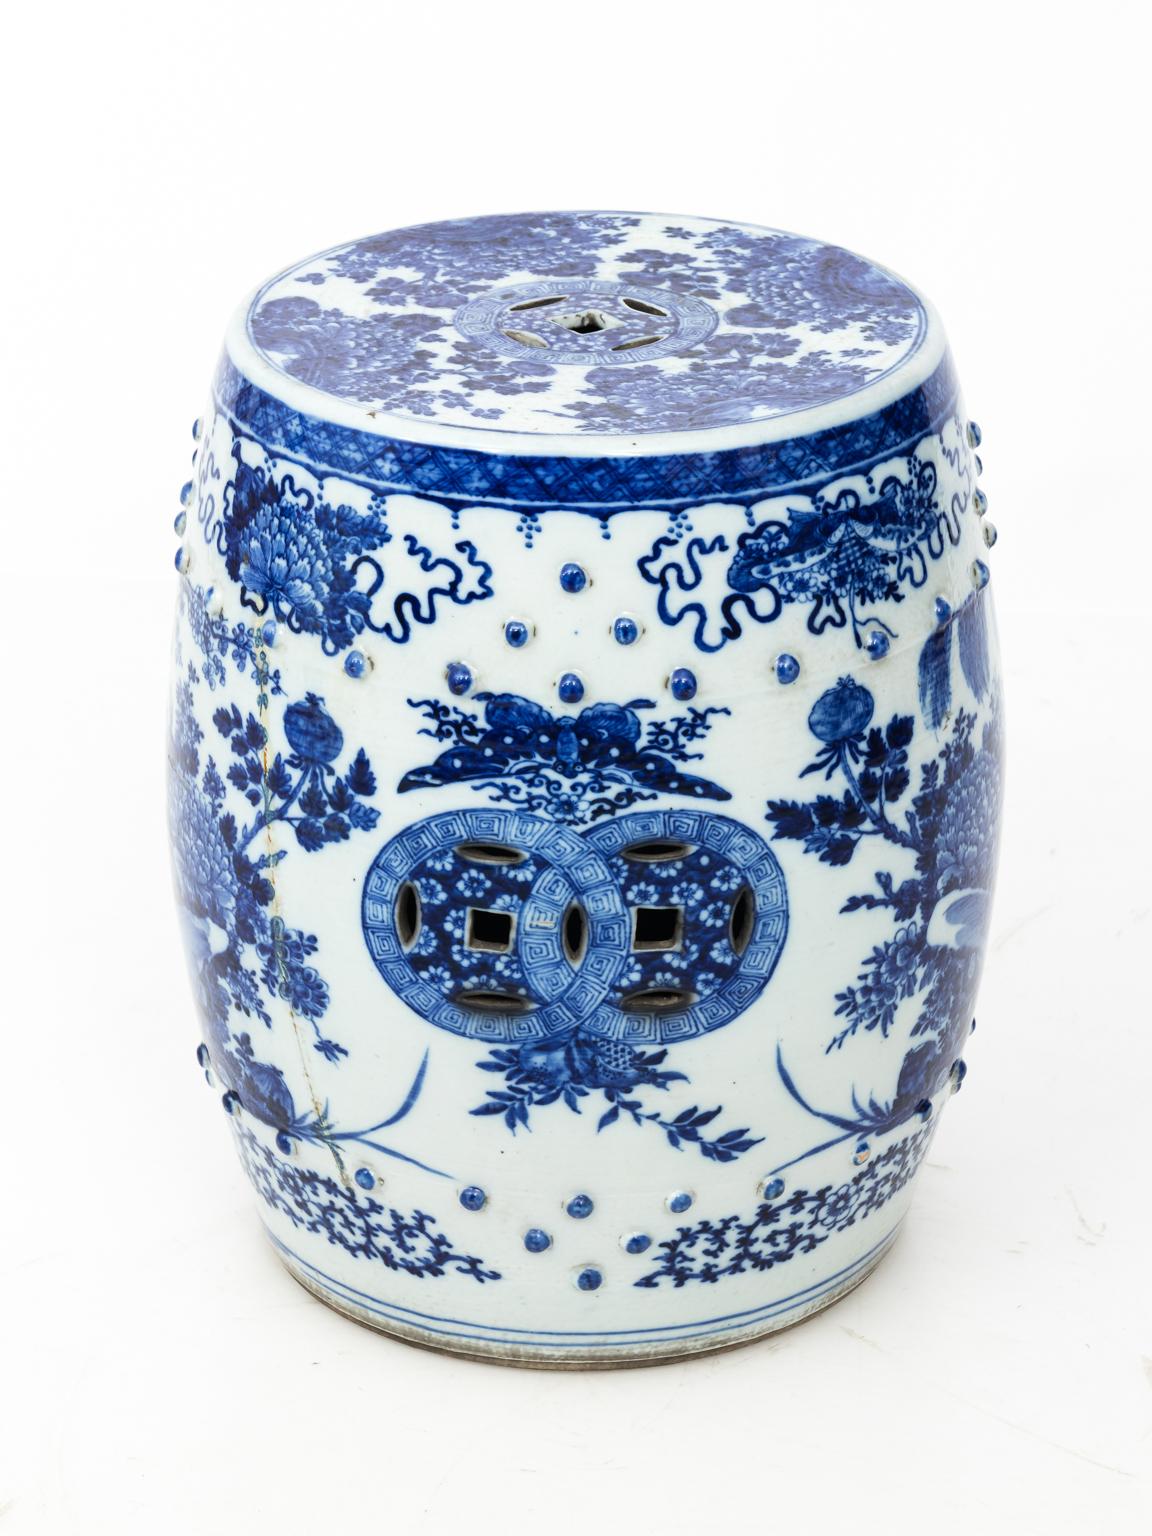 Blue and white Chinese porcelain garden seat heavily painted with birds and flowers, circa 20th century.